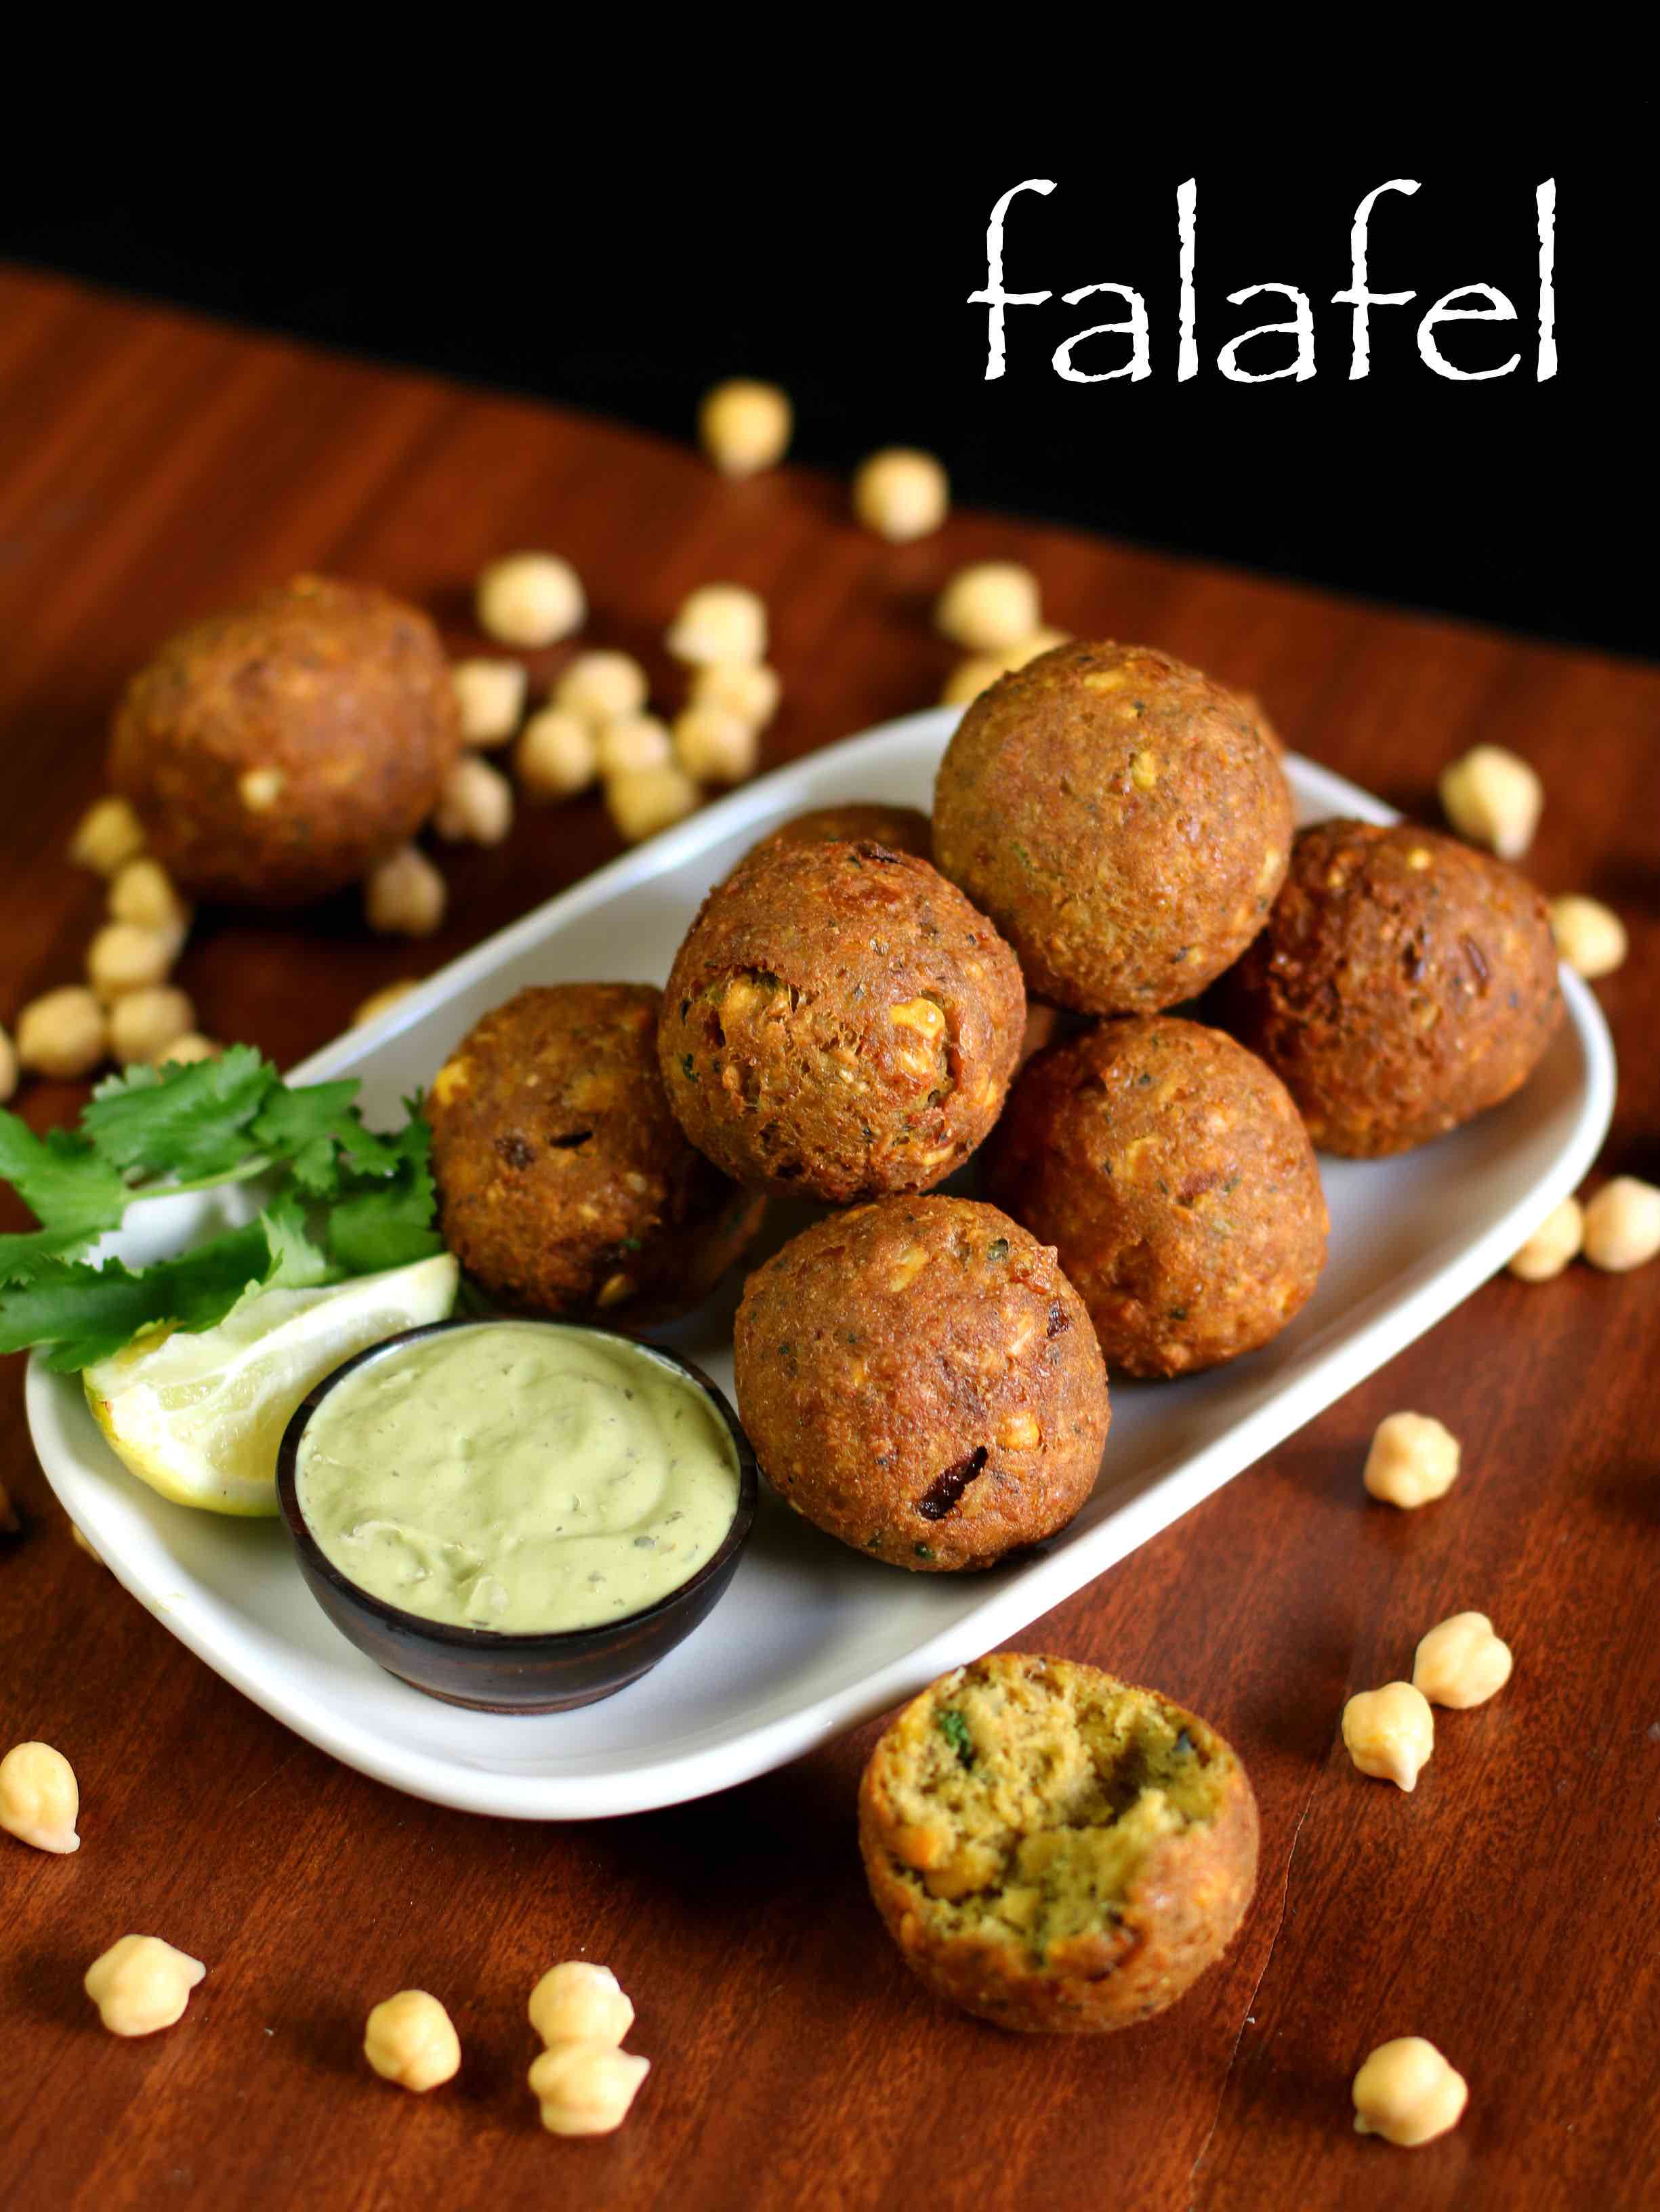 How to Make Falafel With This Classic Recipe